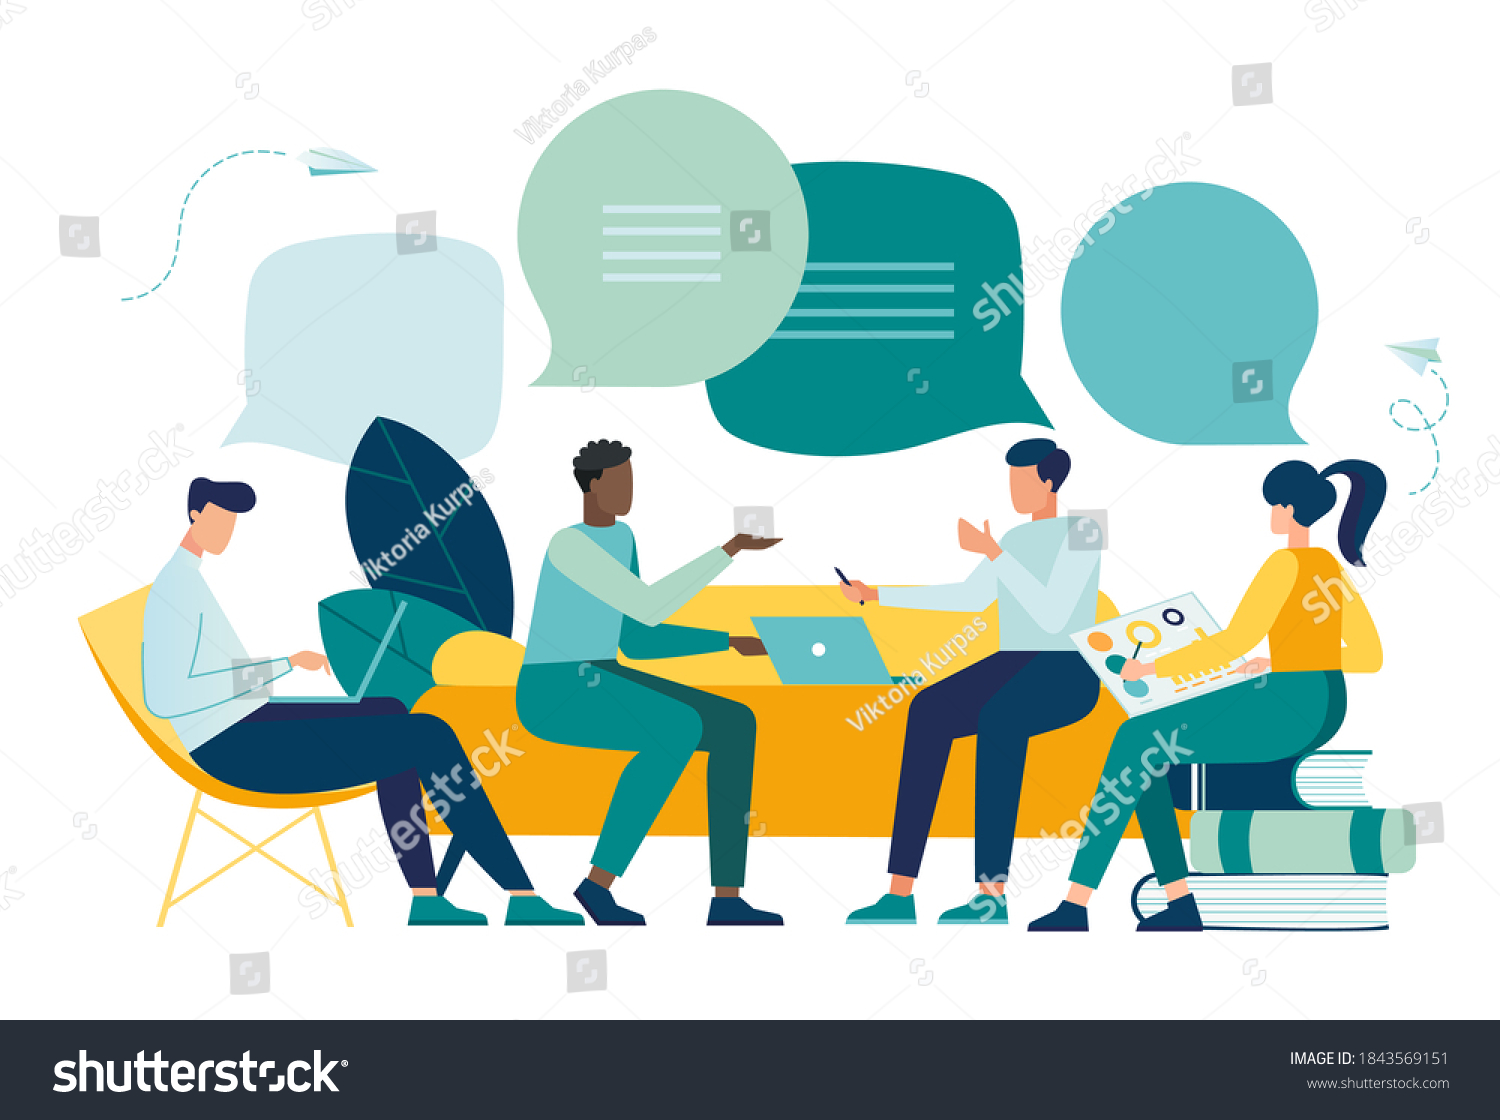 Vector illustration, workers are sitting at the negotiating table, vector collective thinking and brainstorming, company information analytics #1843569151